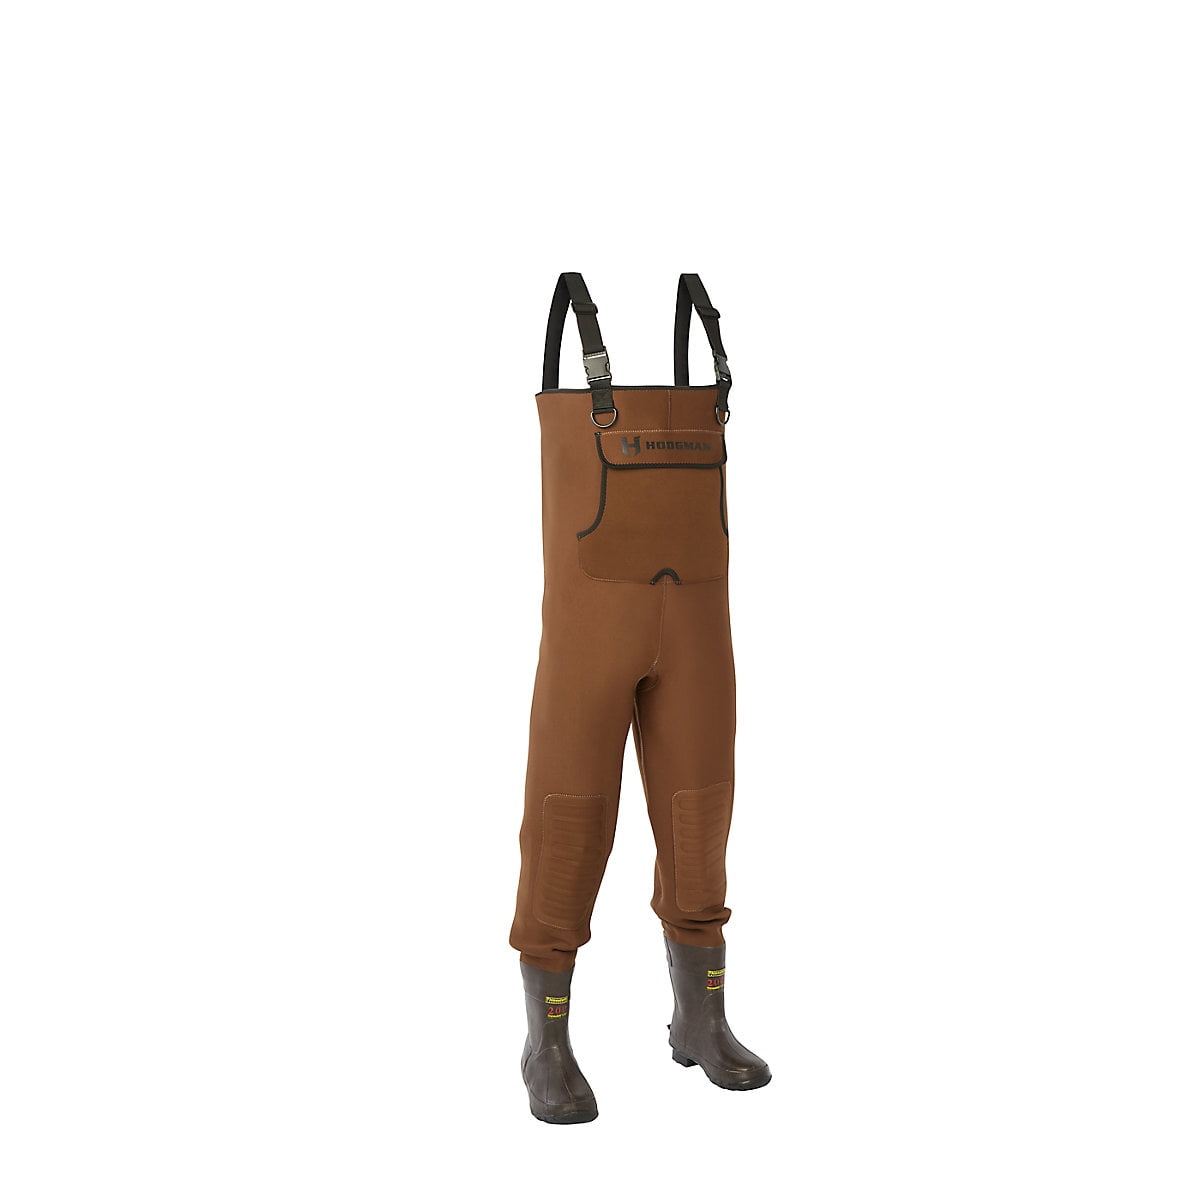 Details about   HODGMAN WADERS RUBBER BOOTS COTTON UPPER DURABLE mens size 7 CASTER POCKET BROWN 